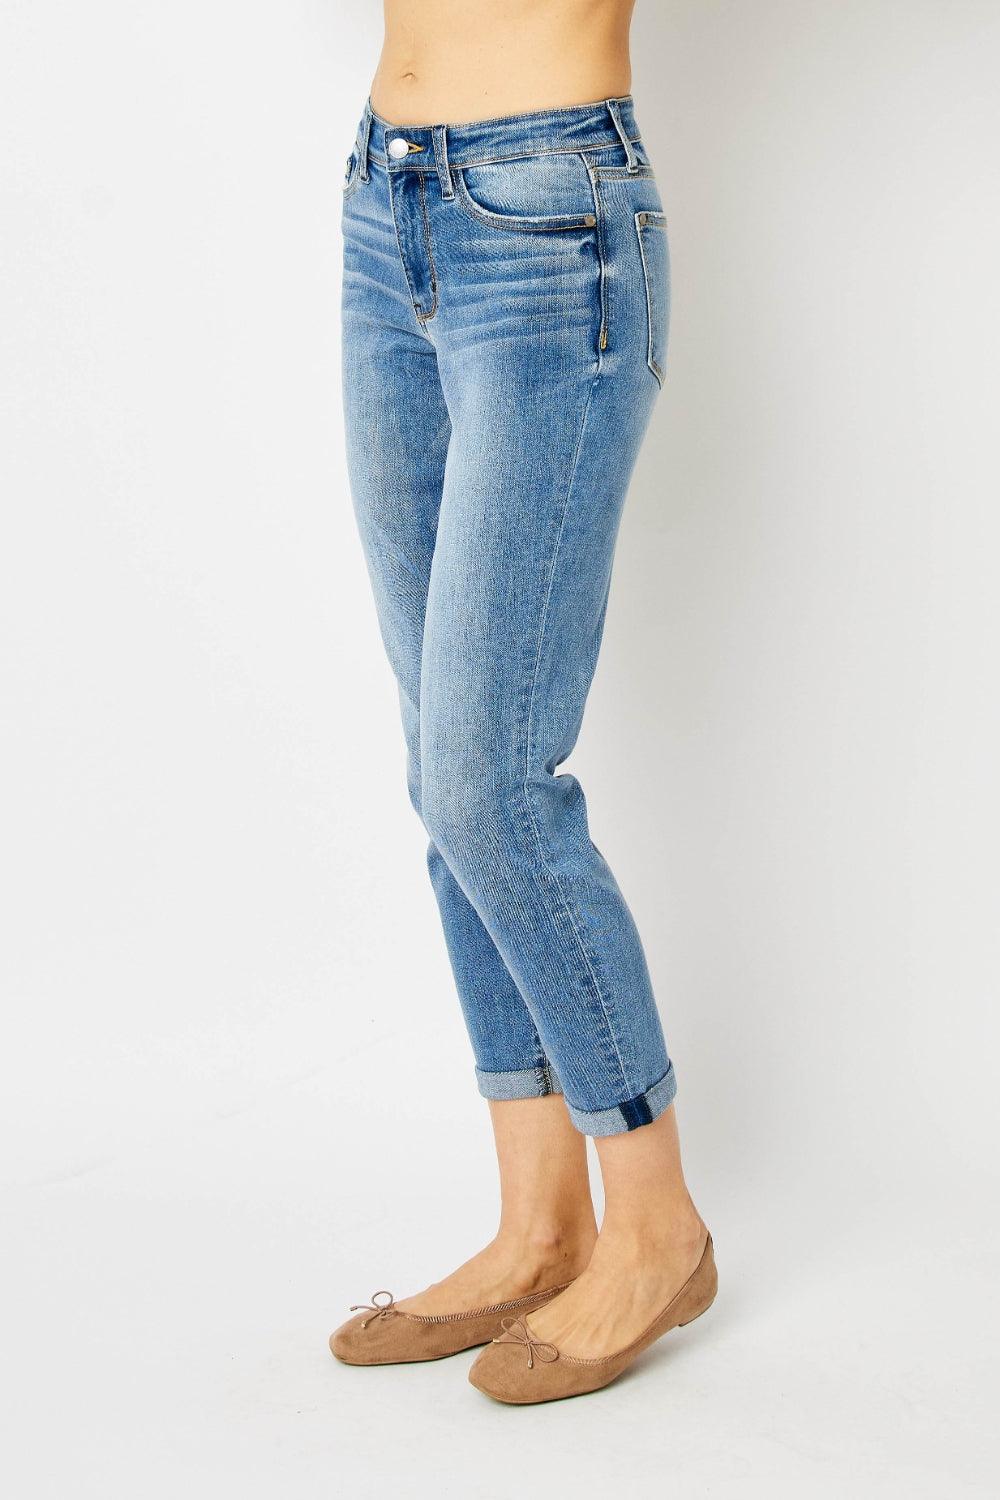 Judy Blue Full Size Cuffed Hem Slim Jeans - Anchored Feather Boutique